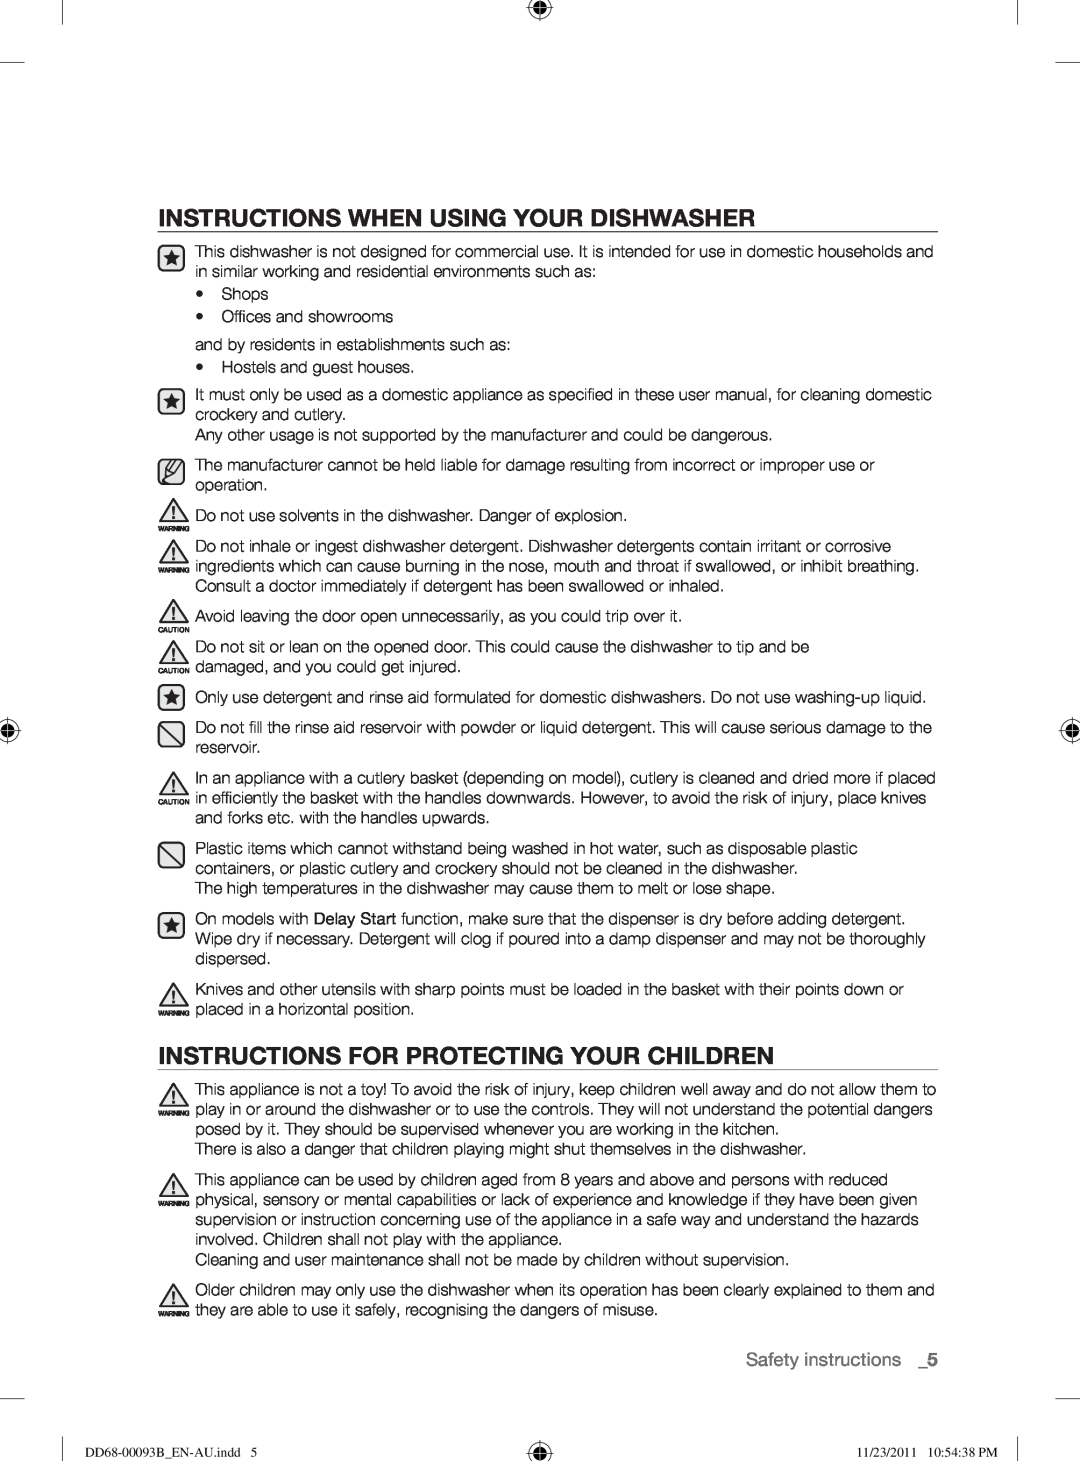 Samsung DW-FG520 Instructions When Using Your Dishwasher, Instructions For Protecting Your Children, Safety instructions 